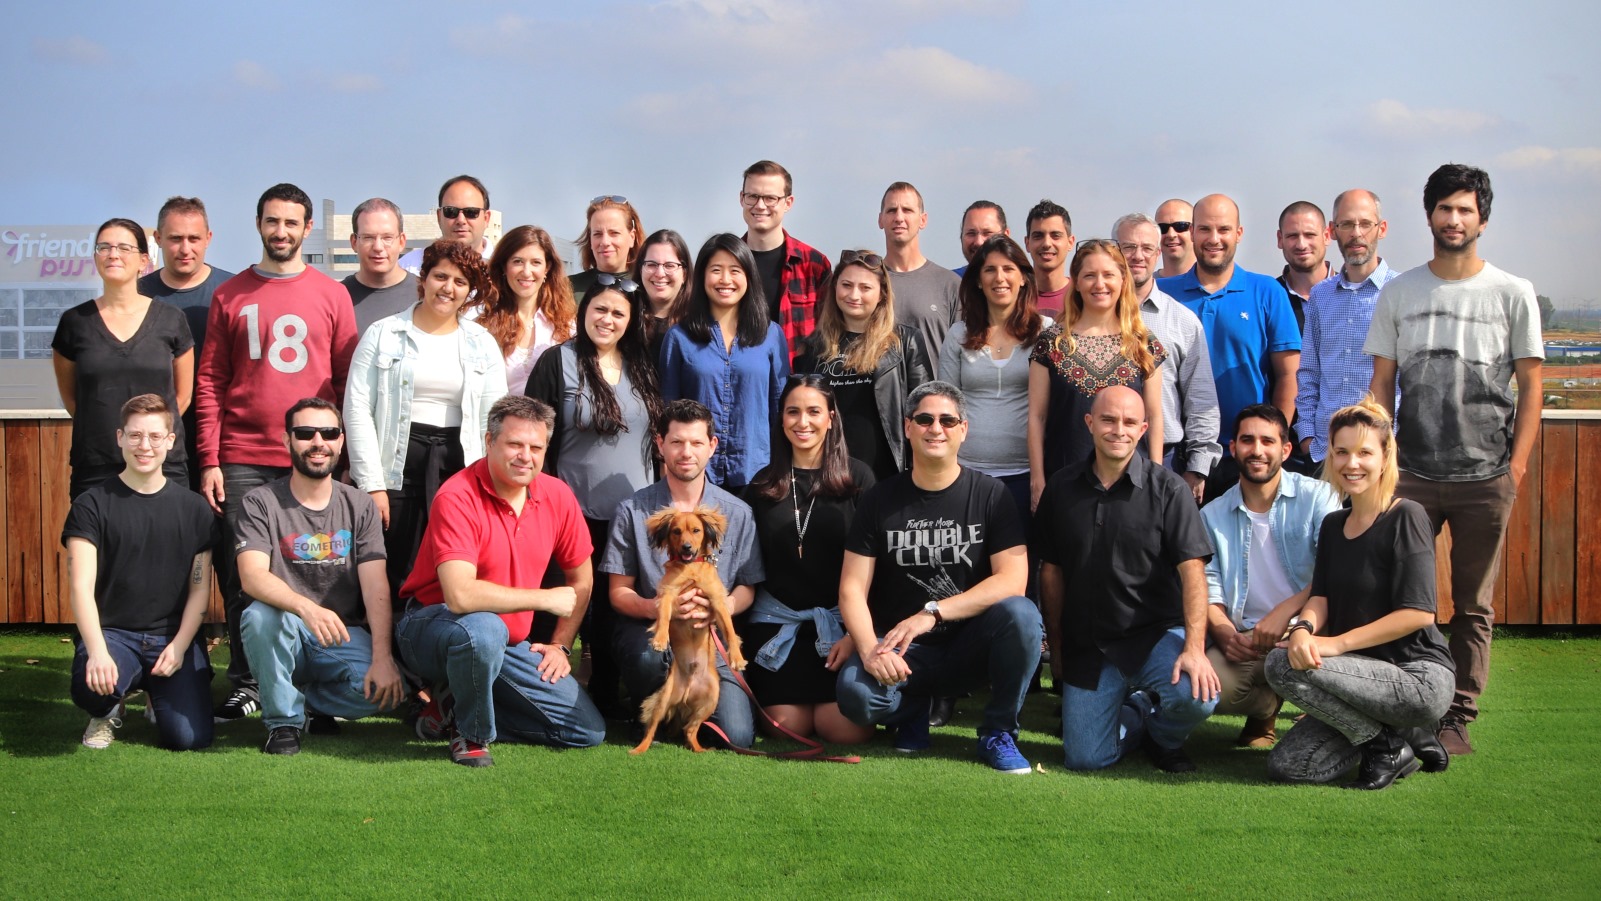 The GamEffective team in Ra’anana raised $11 million in April 2018. Photo: courtesy